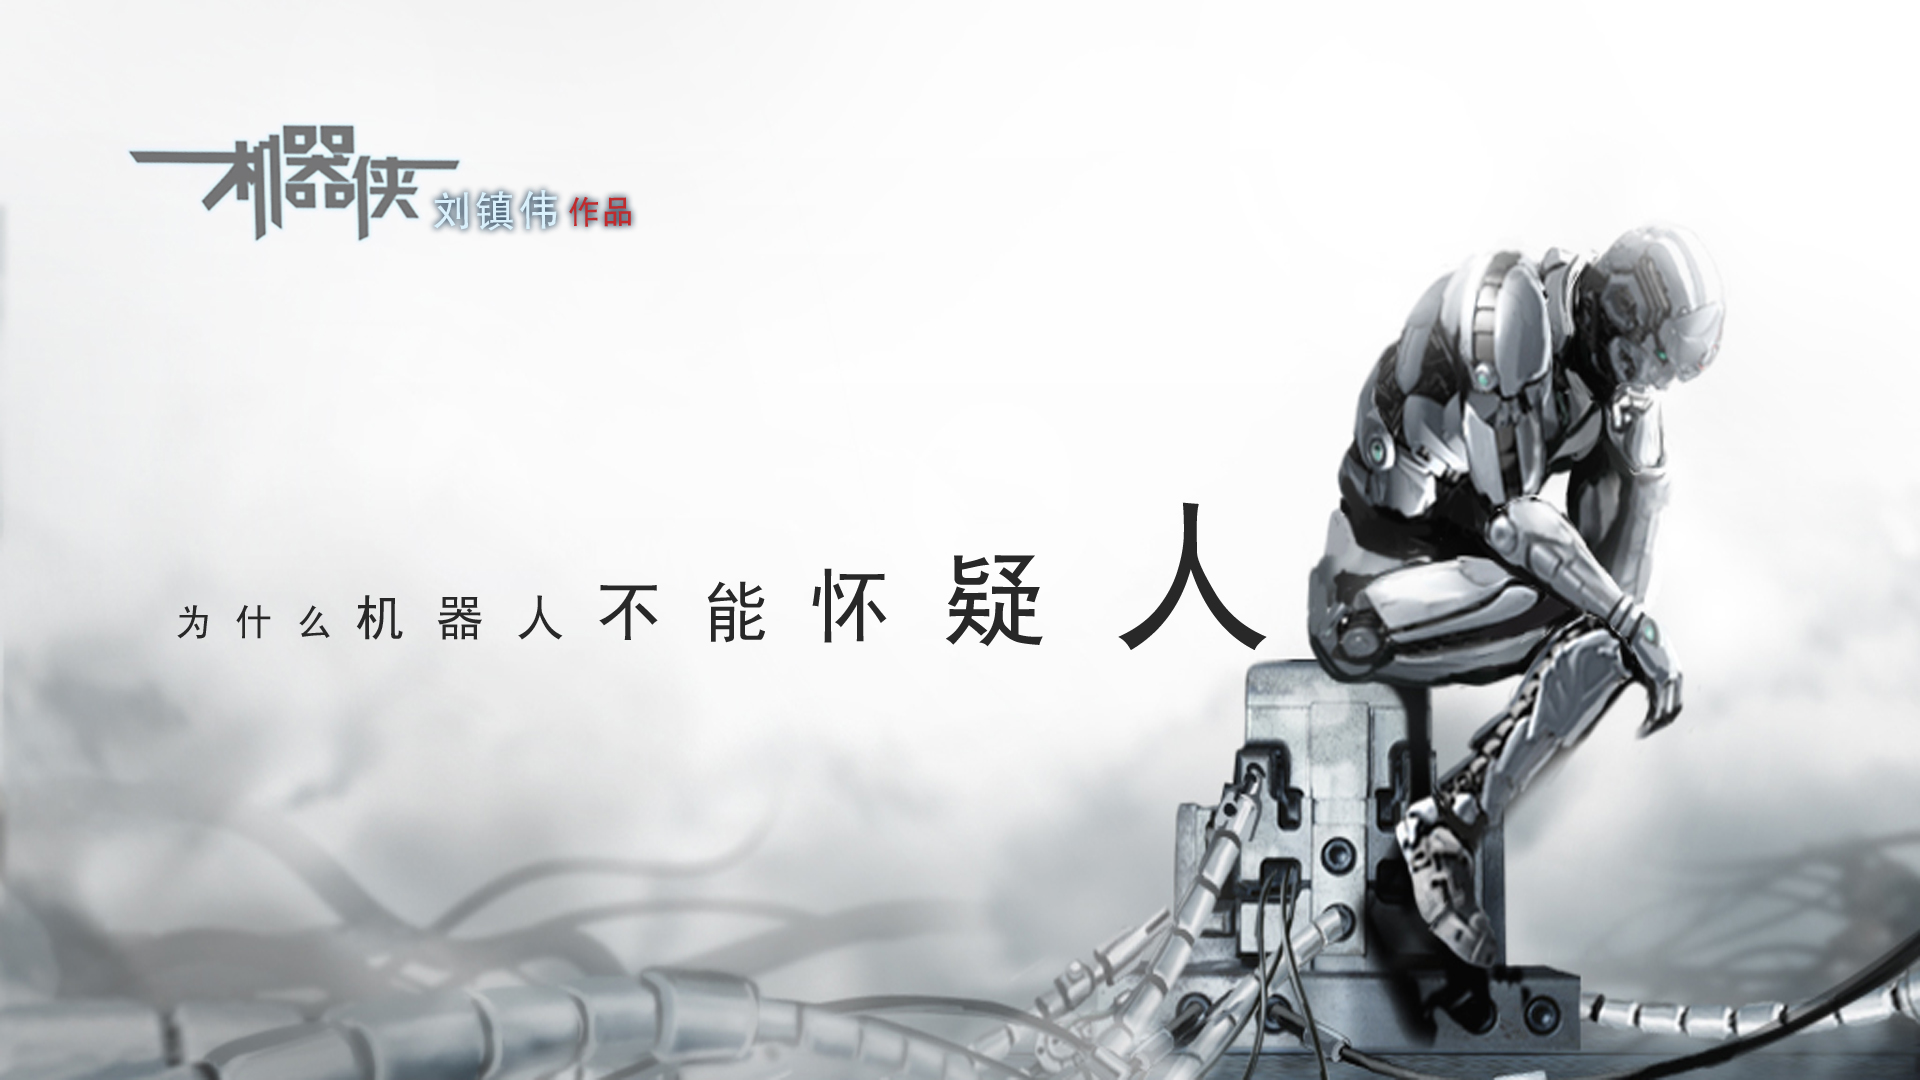 Kungfu Cyborg wallpaper 05 in wallpapers album :: photos and ...